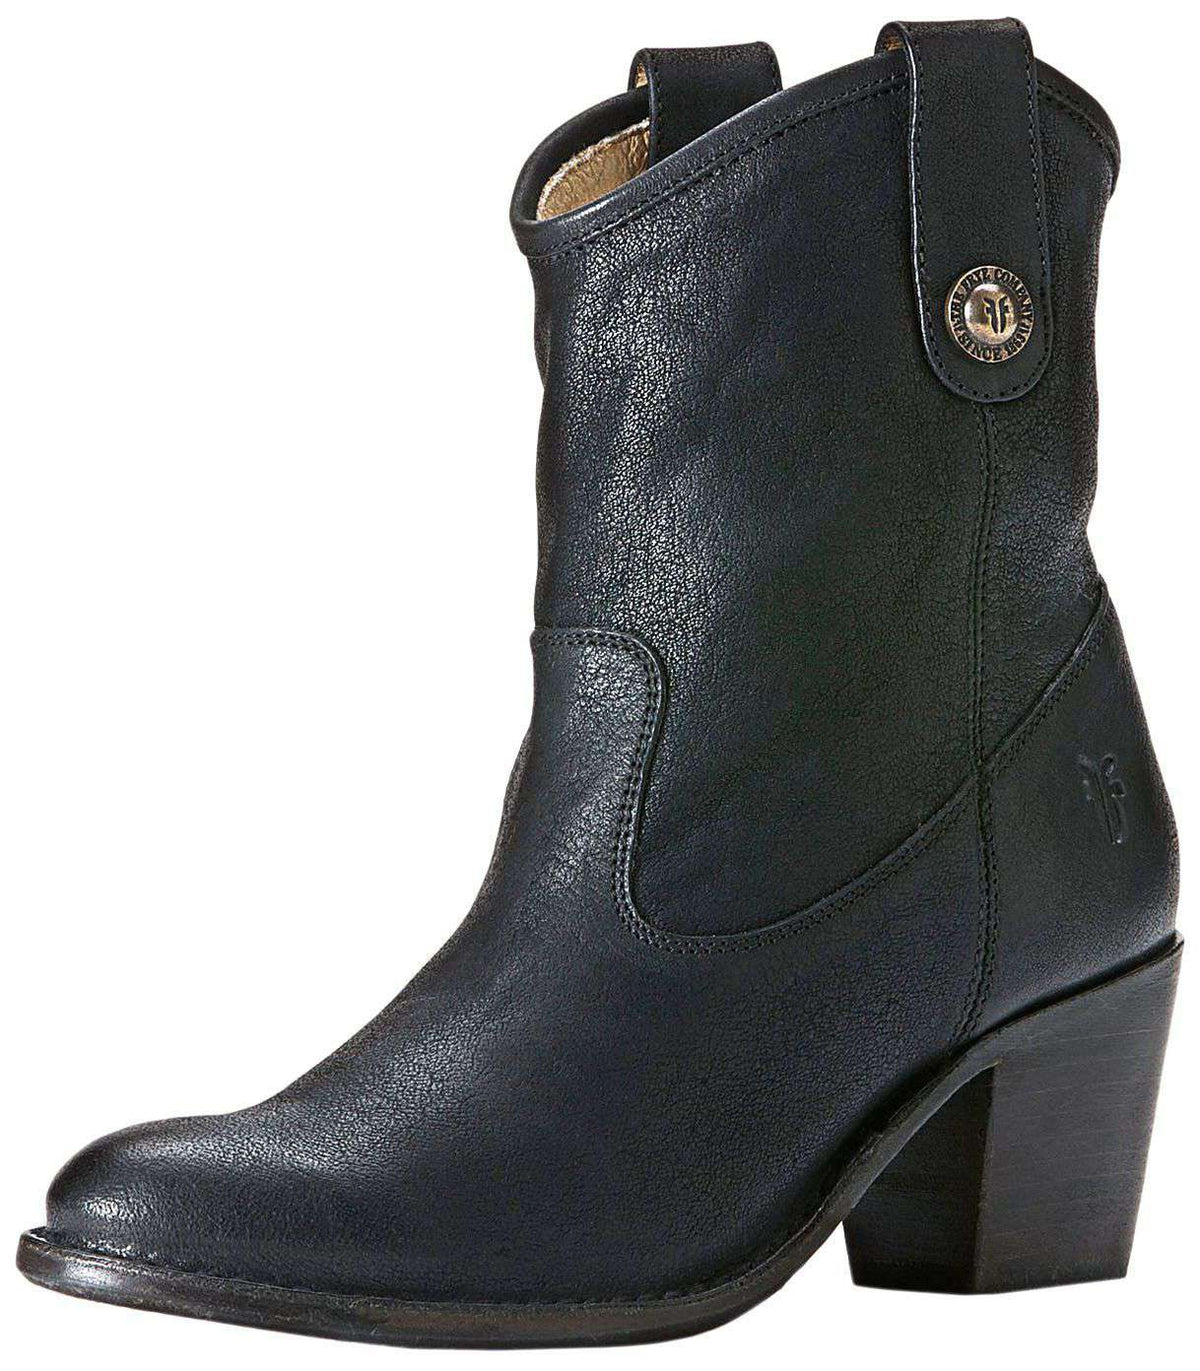 Jackie Button Short Boot in Black by The Frye Company - Country Club Prep